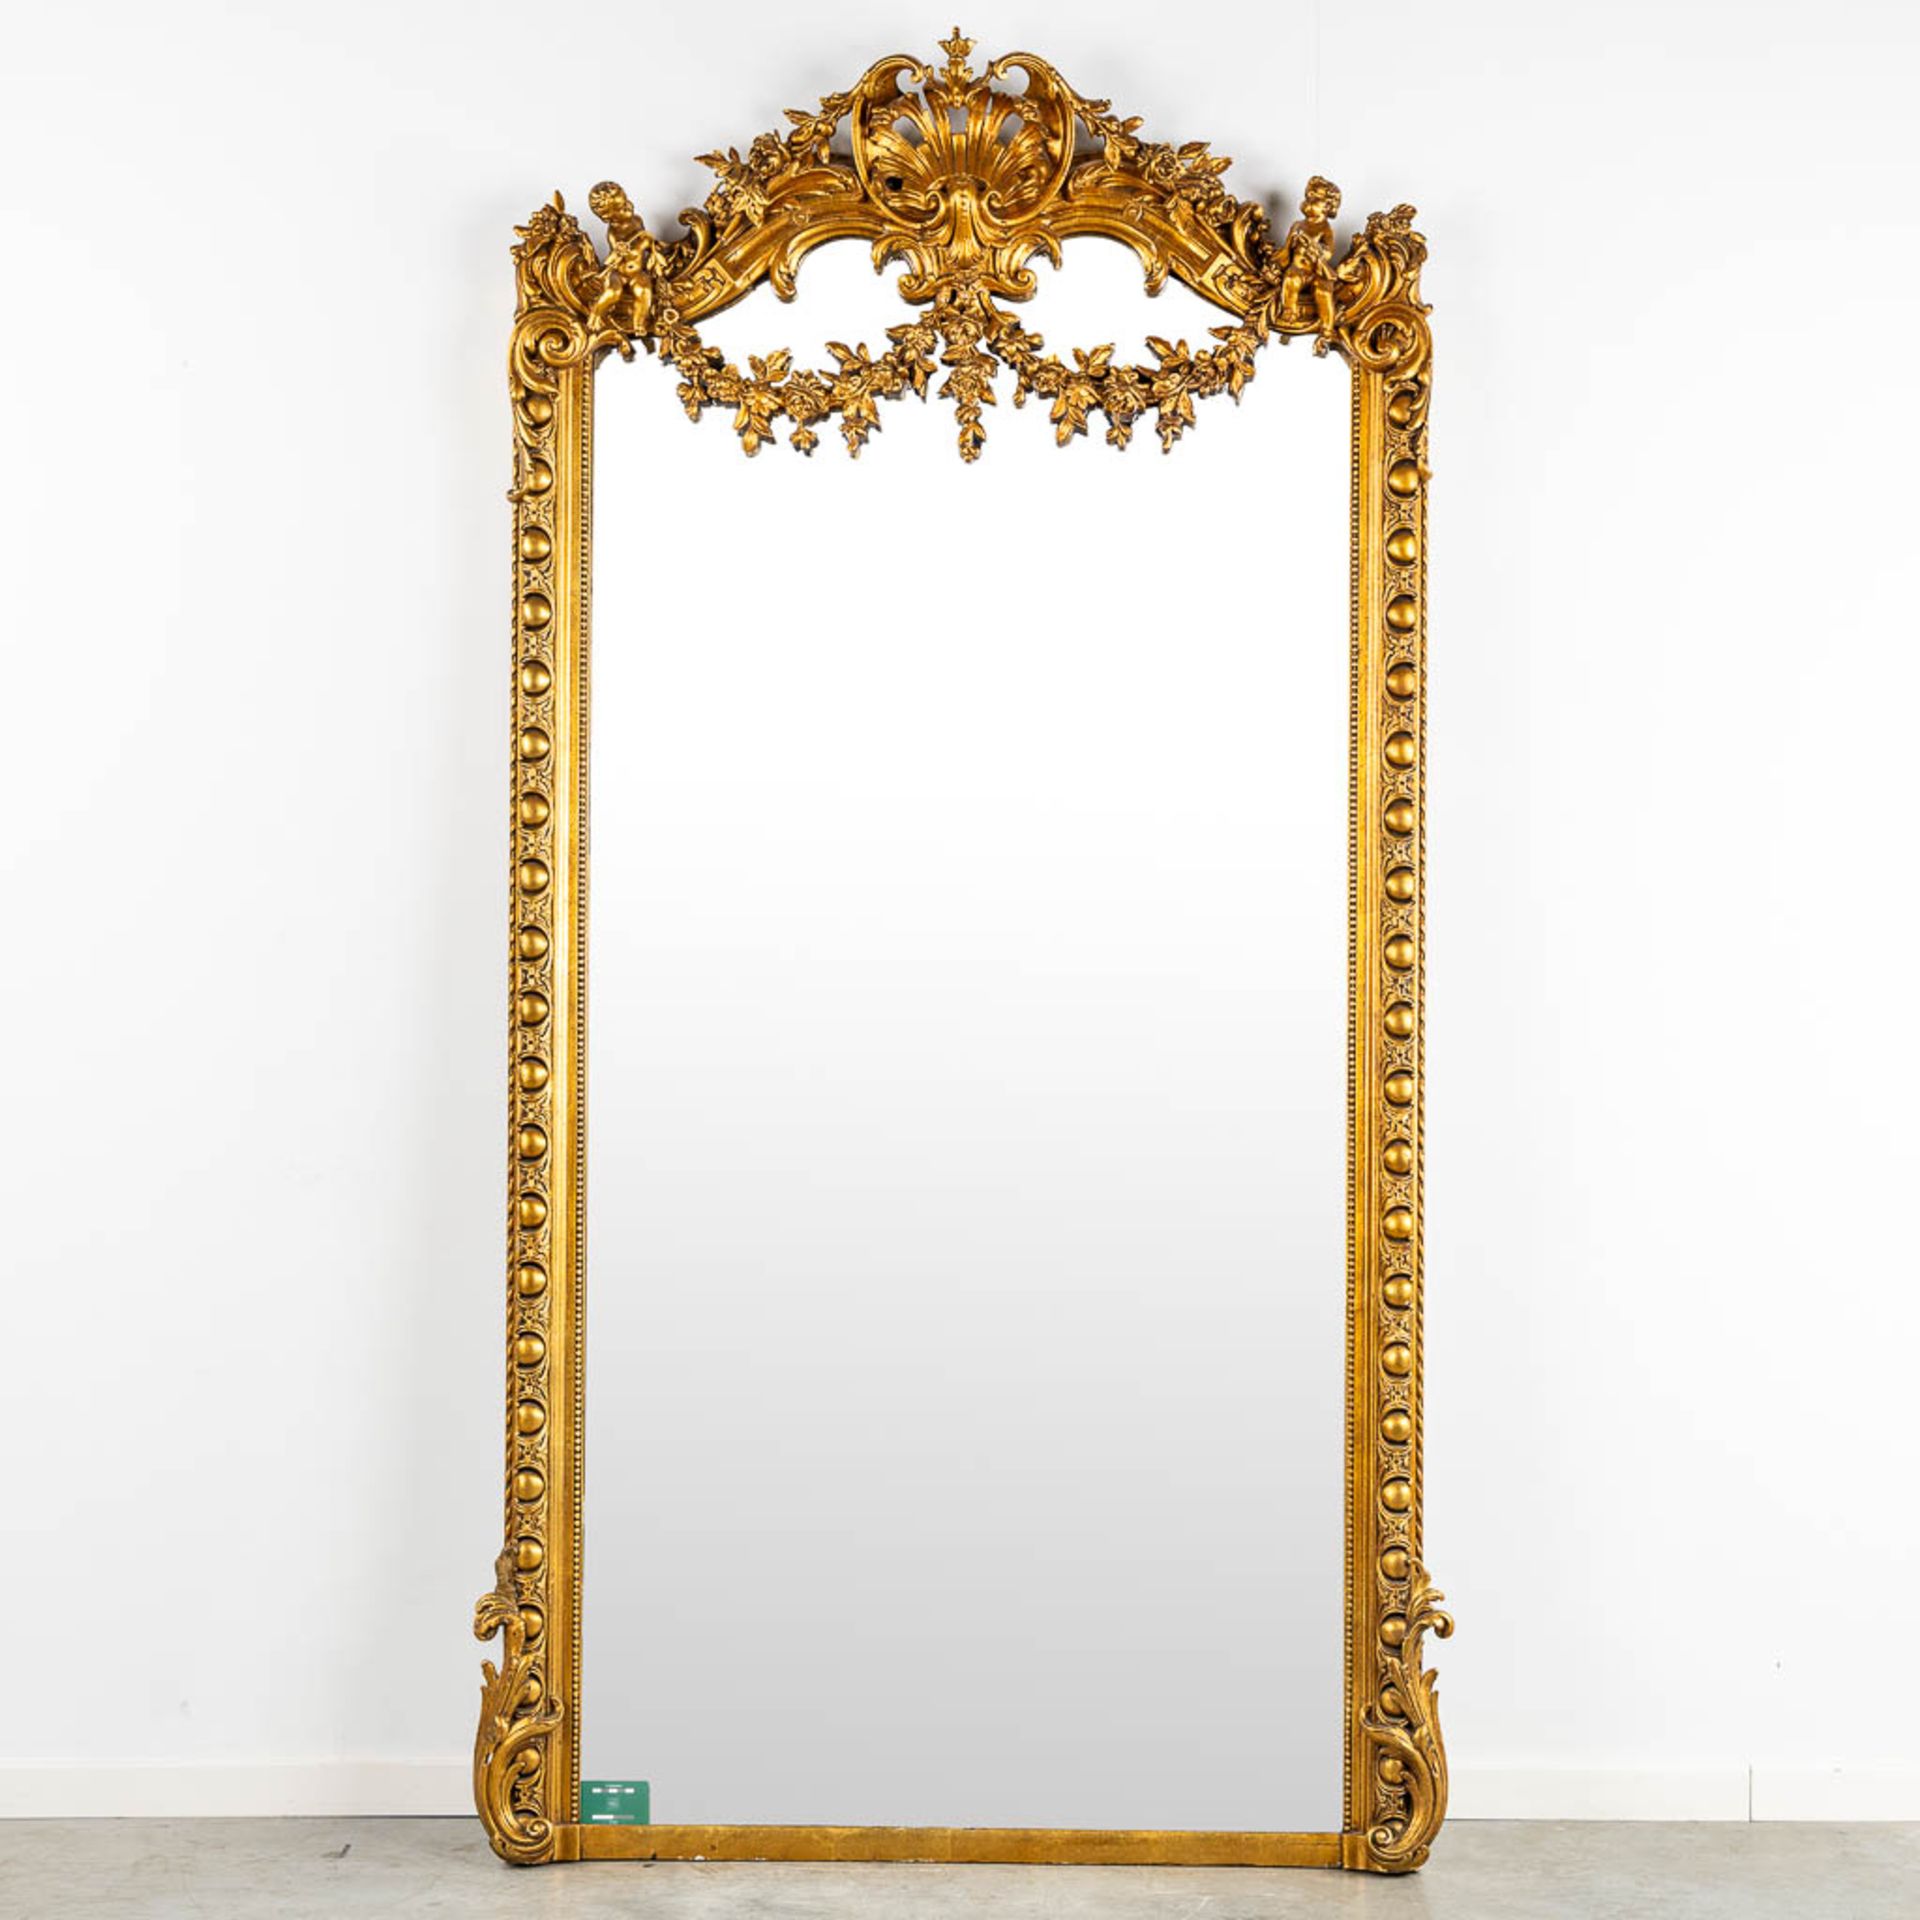 A mirror, sculptured wood, and stucco in a Louis XV style. 20th C. (W:110 x H:218 cm) - Image 2 of 13